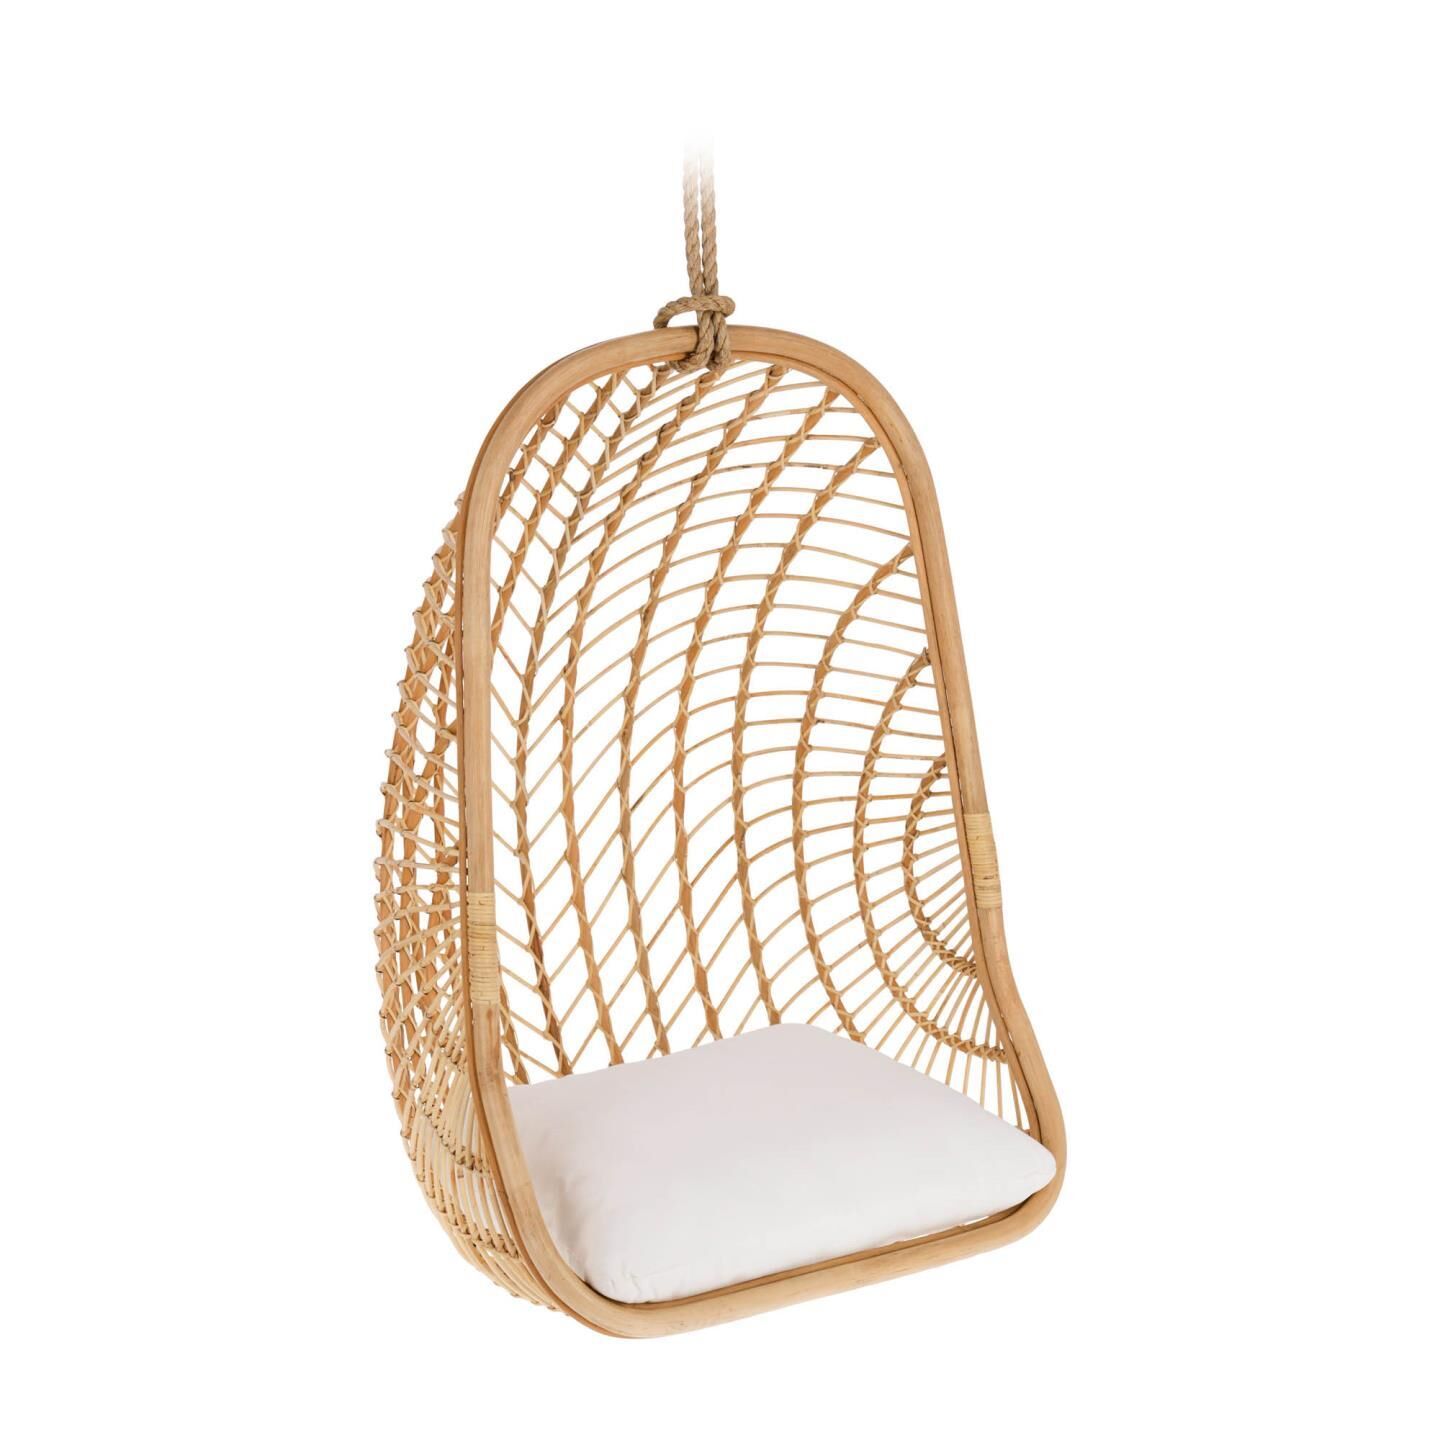 Kave Home Ekaterina hanging chair